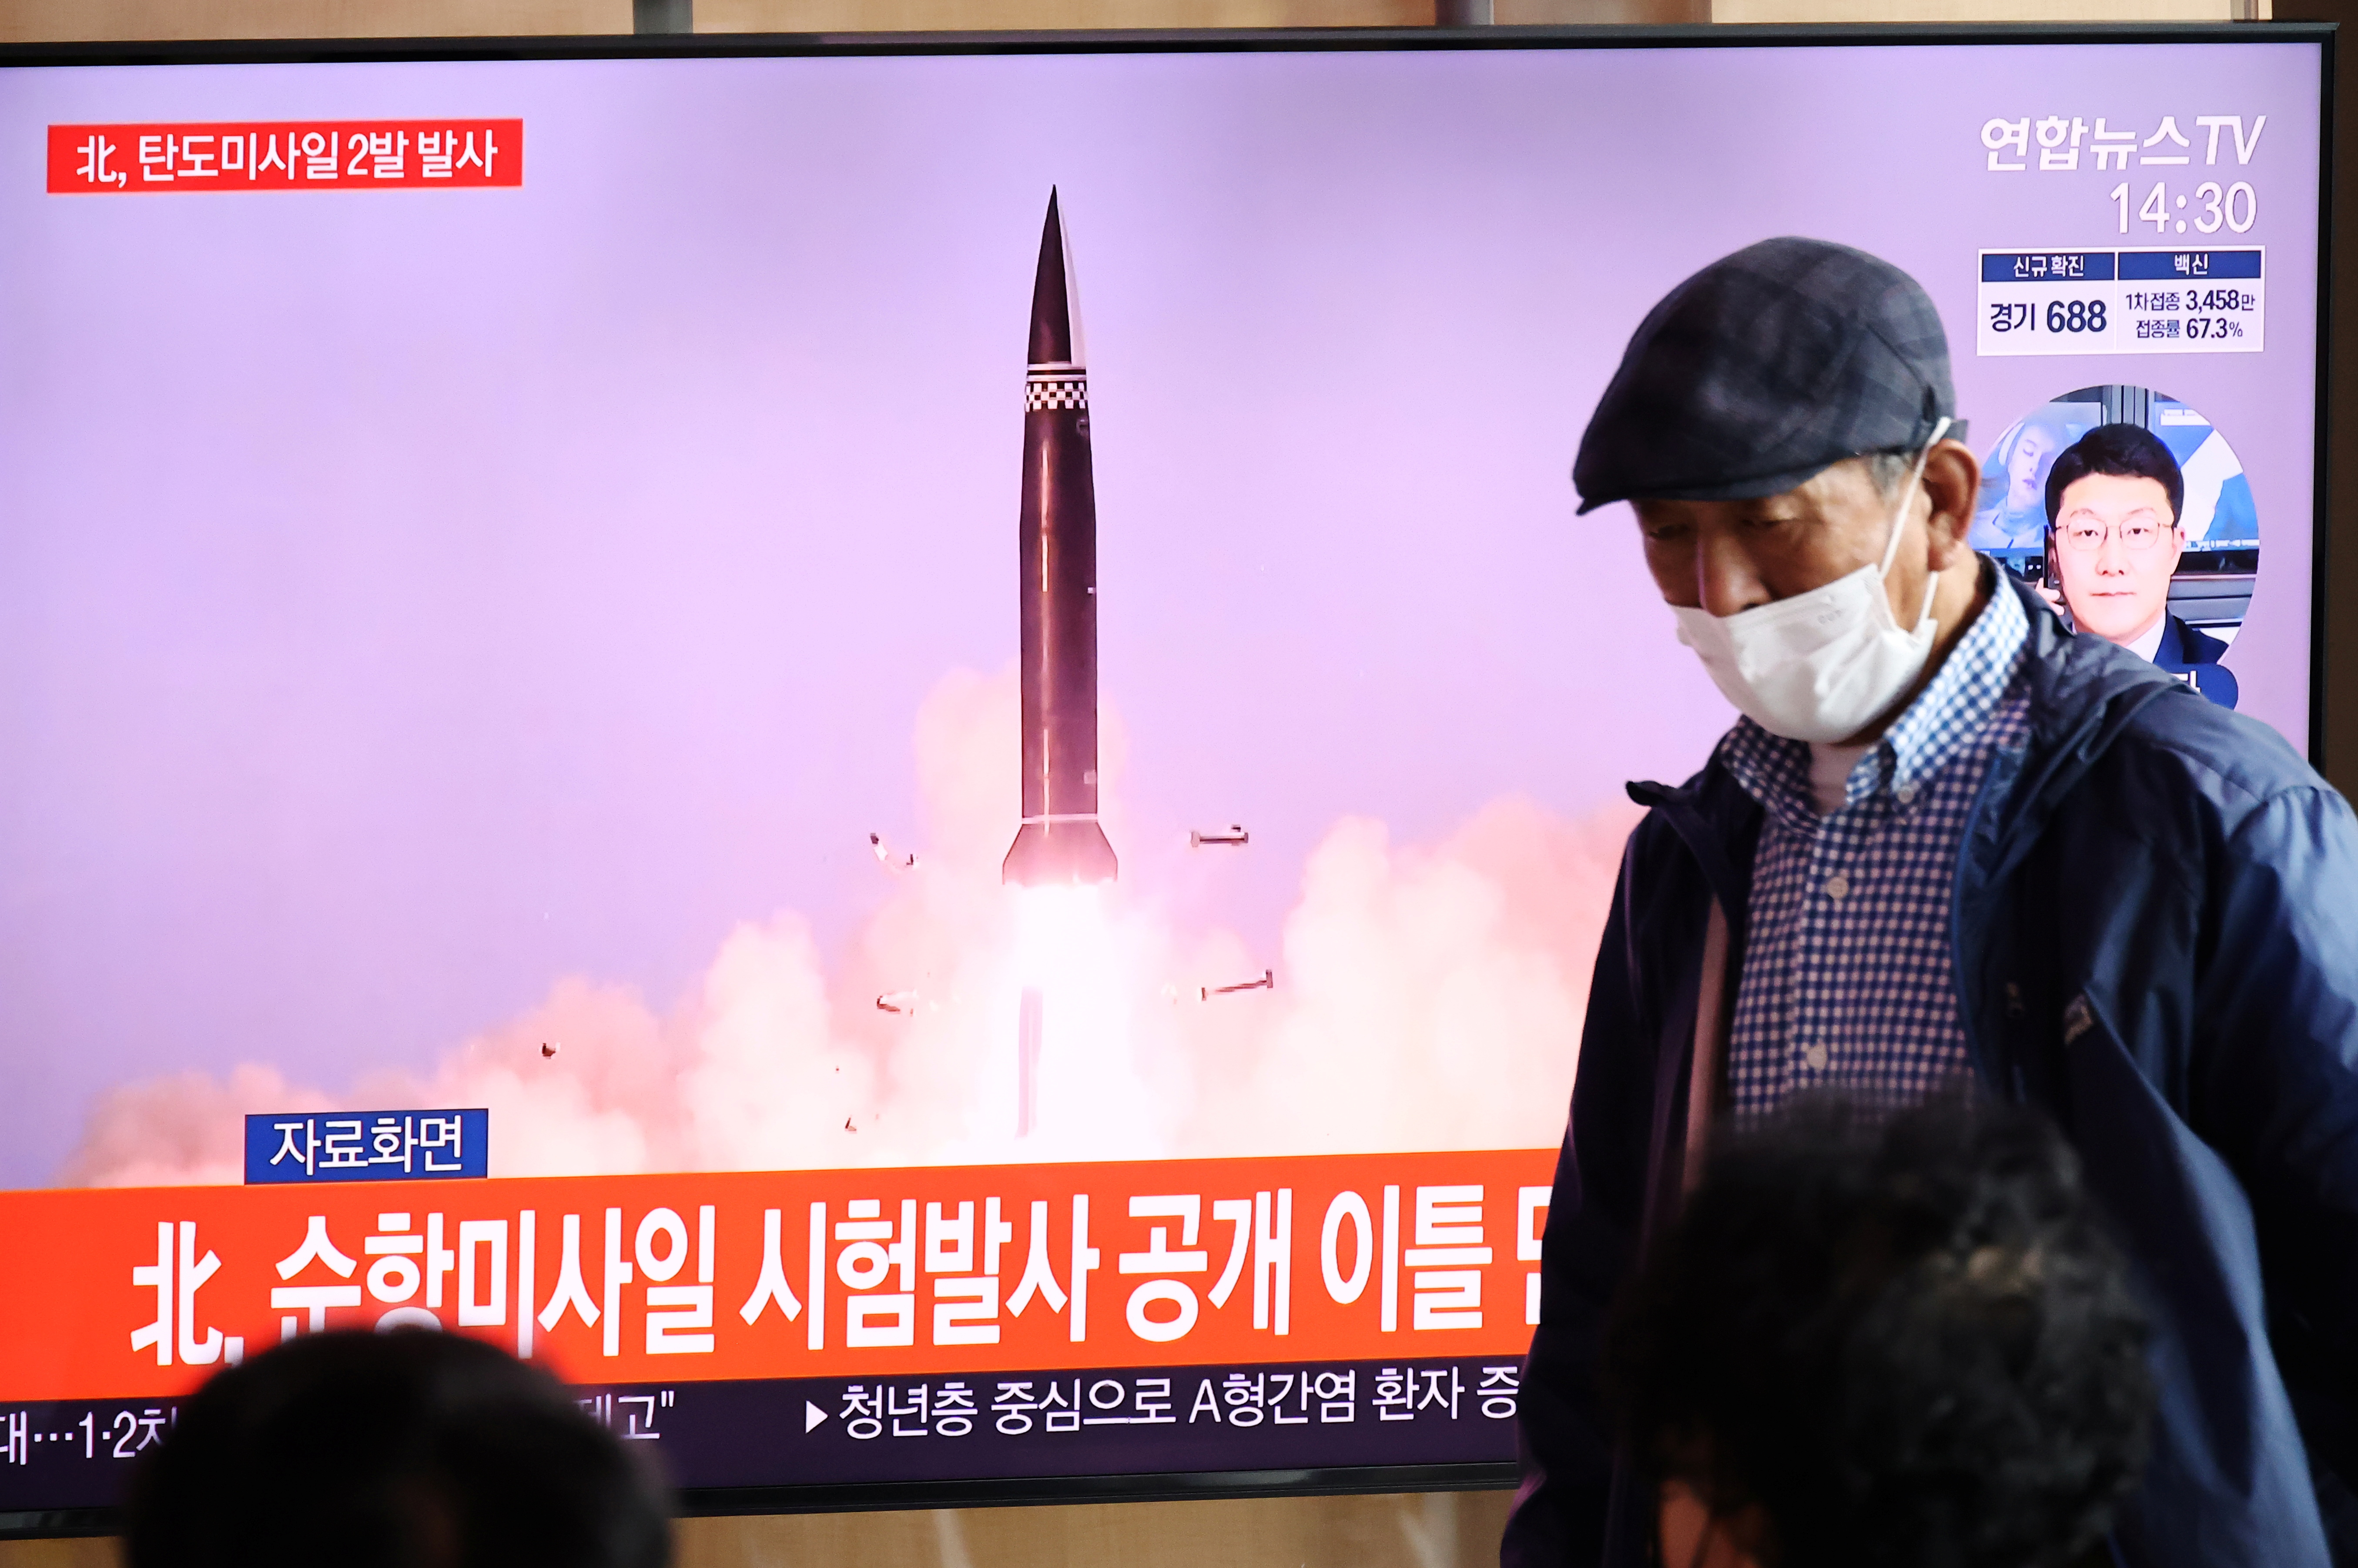 People watch a TV broadcasting file footage of a news report on North Korea firing what appeared to be a pair of ballistic missiles off its east coast, in Seoul